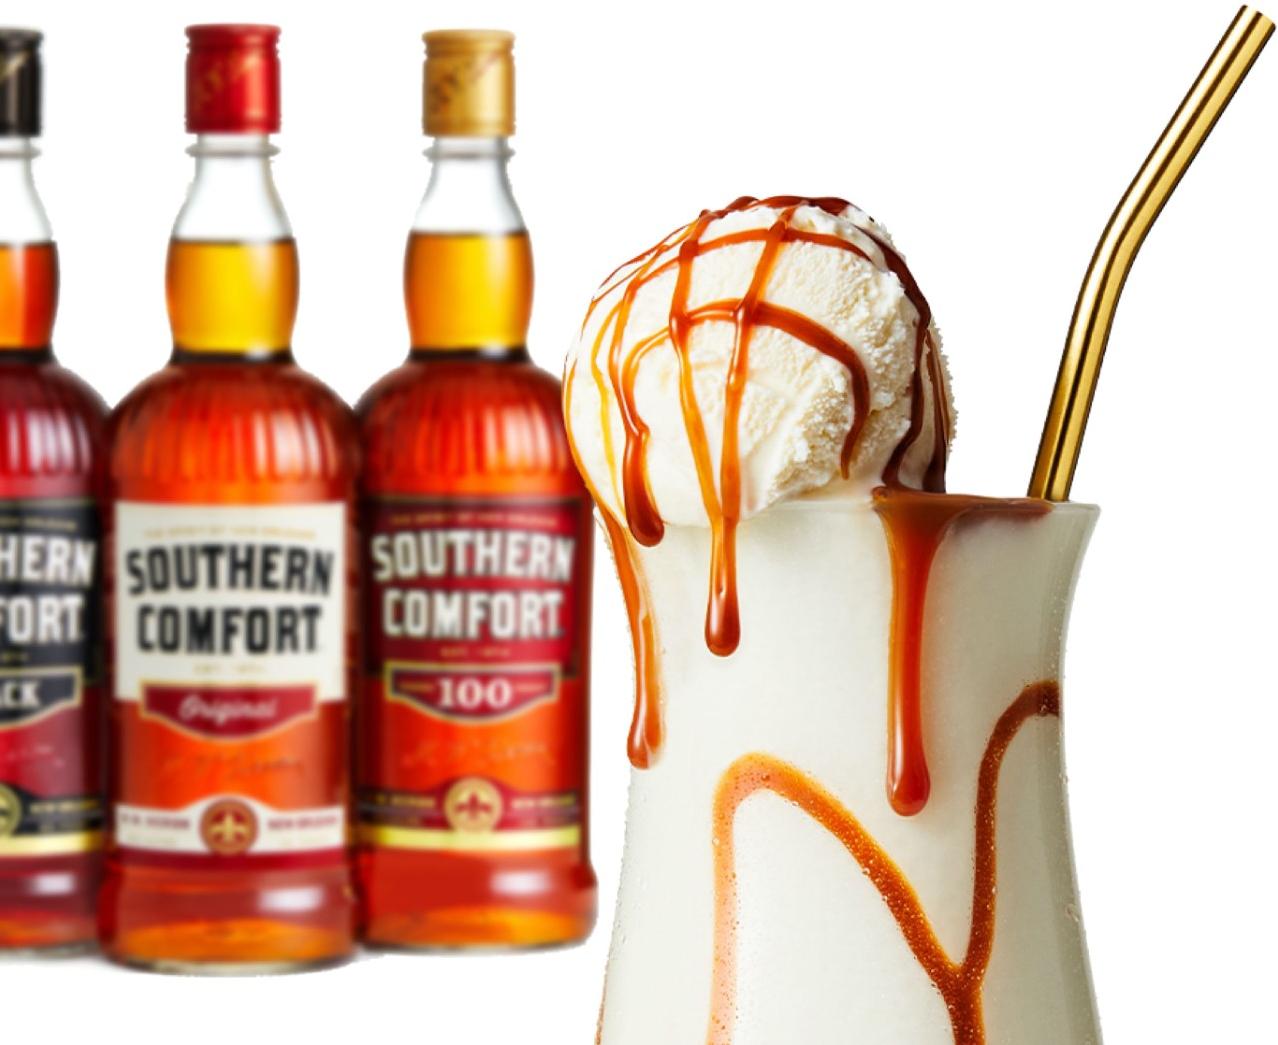  There's no comfort like Southern Comfort - especially when it's mixed to perfection.